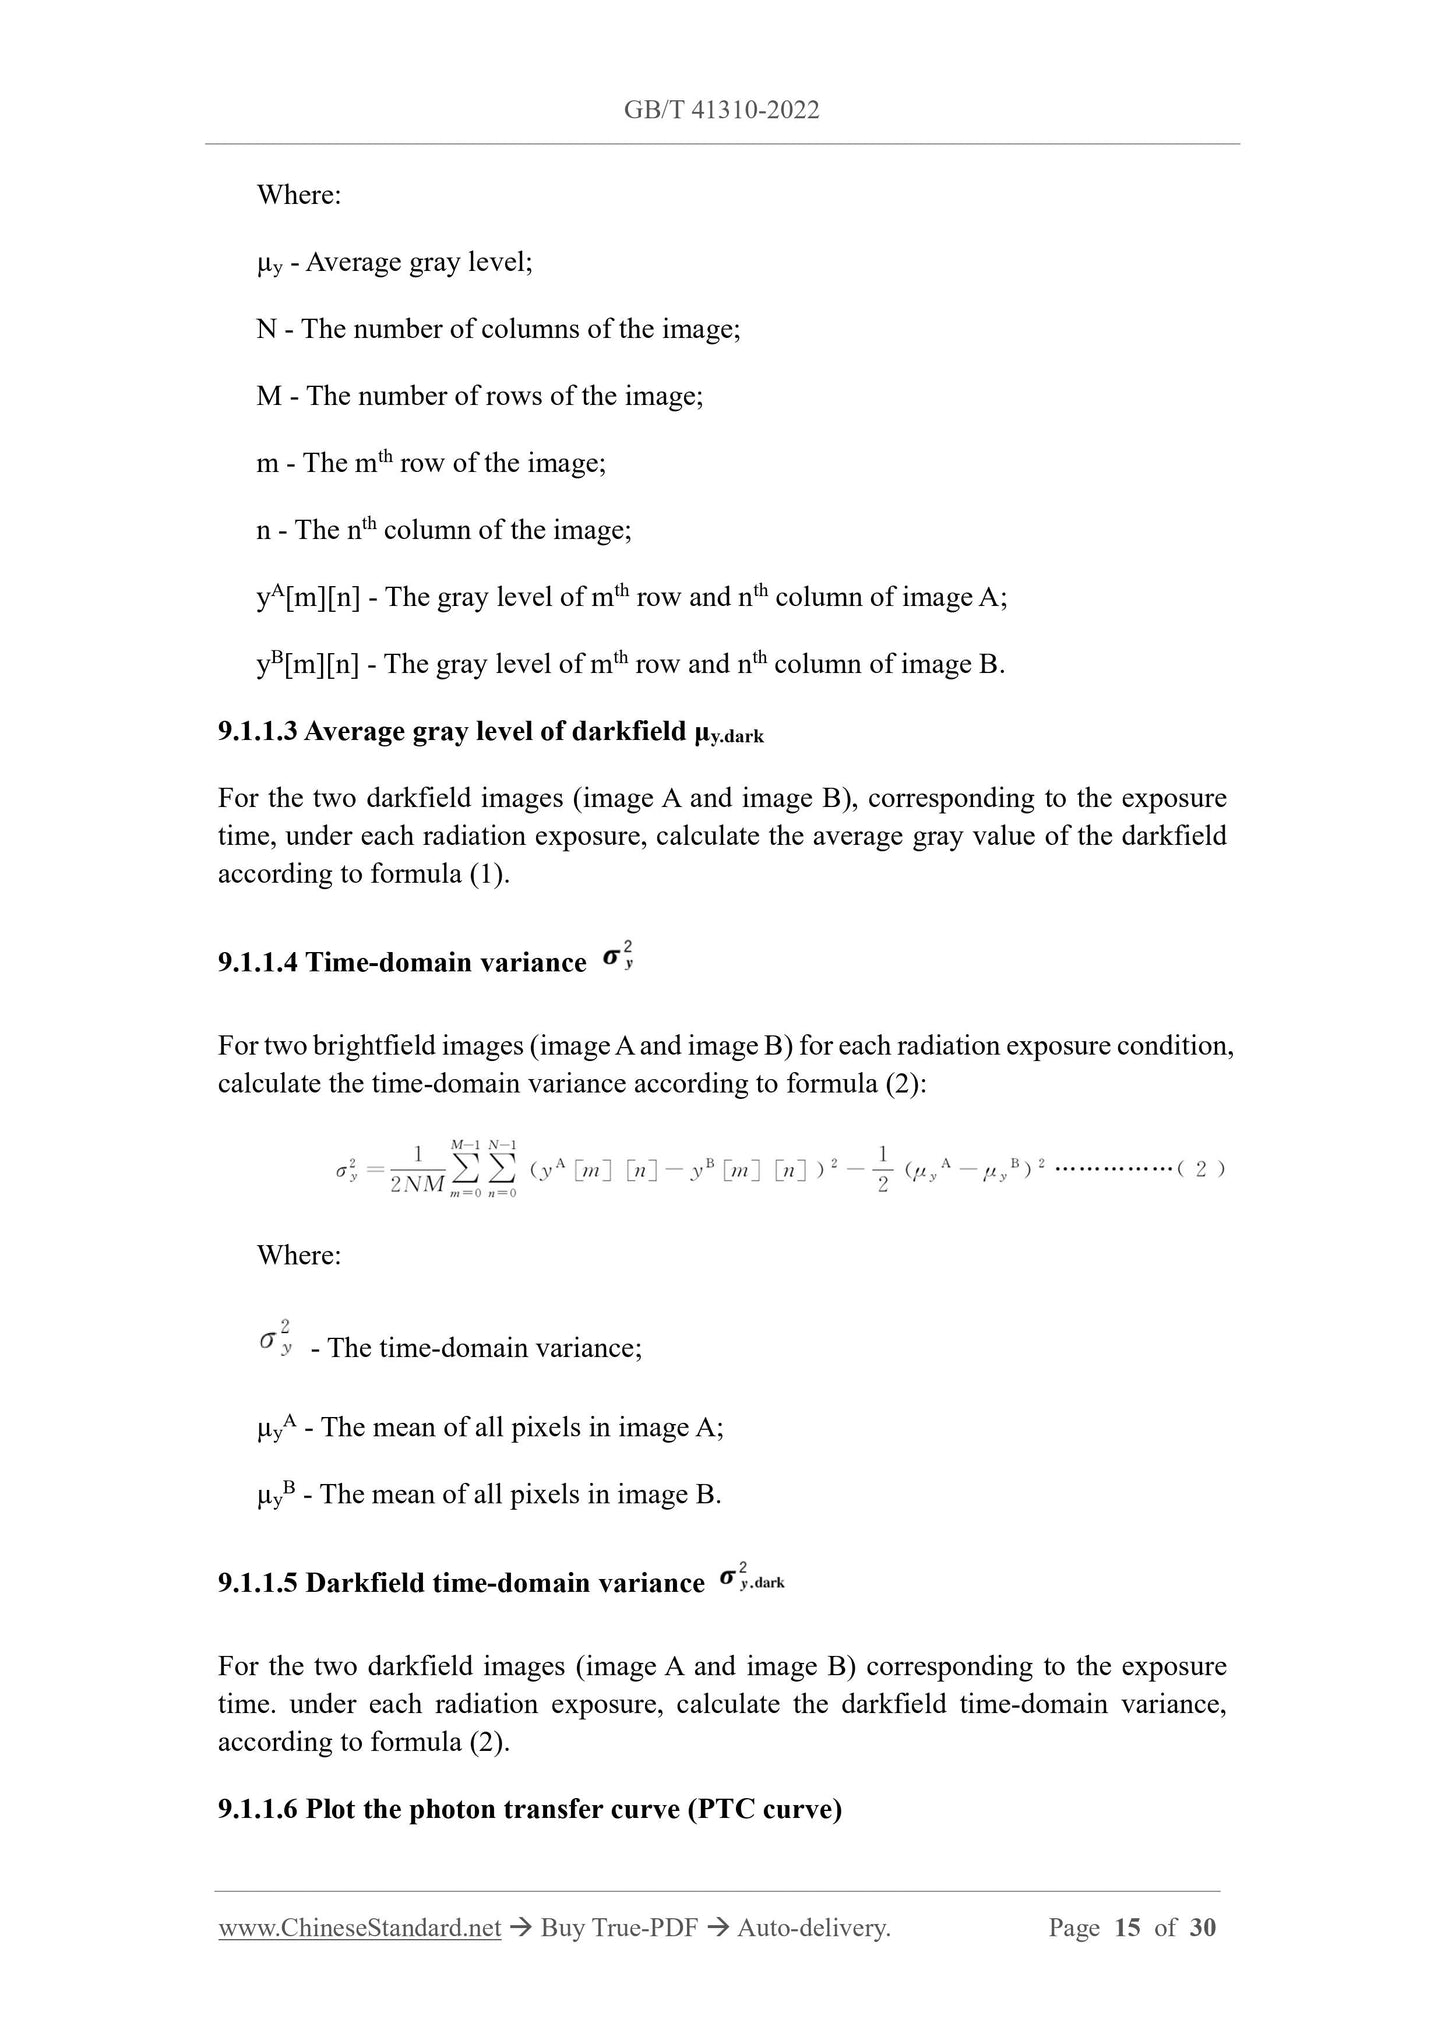 GB/T 41310-2022 Page 7